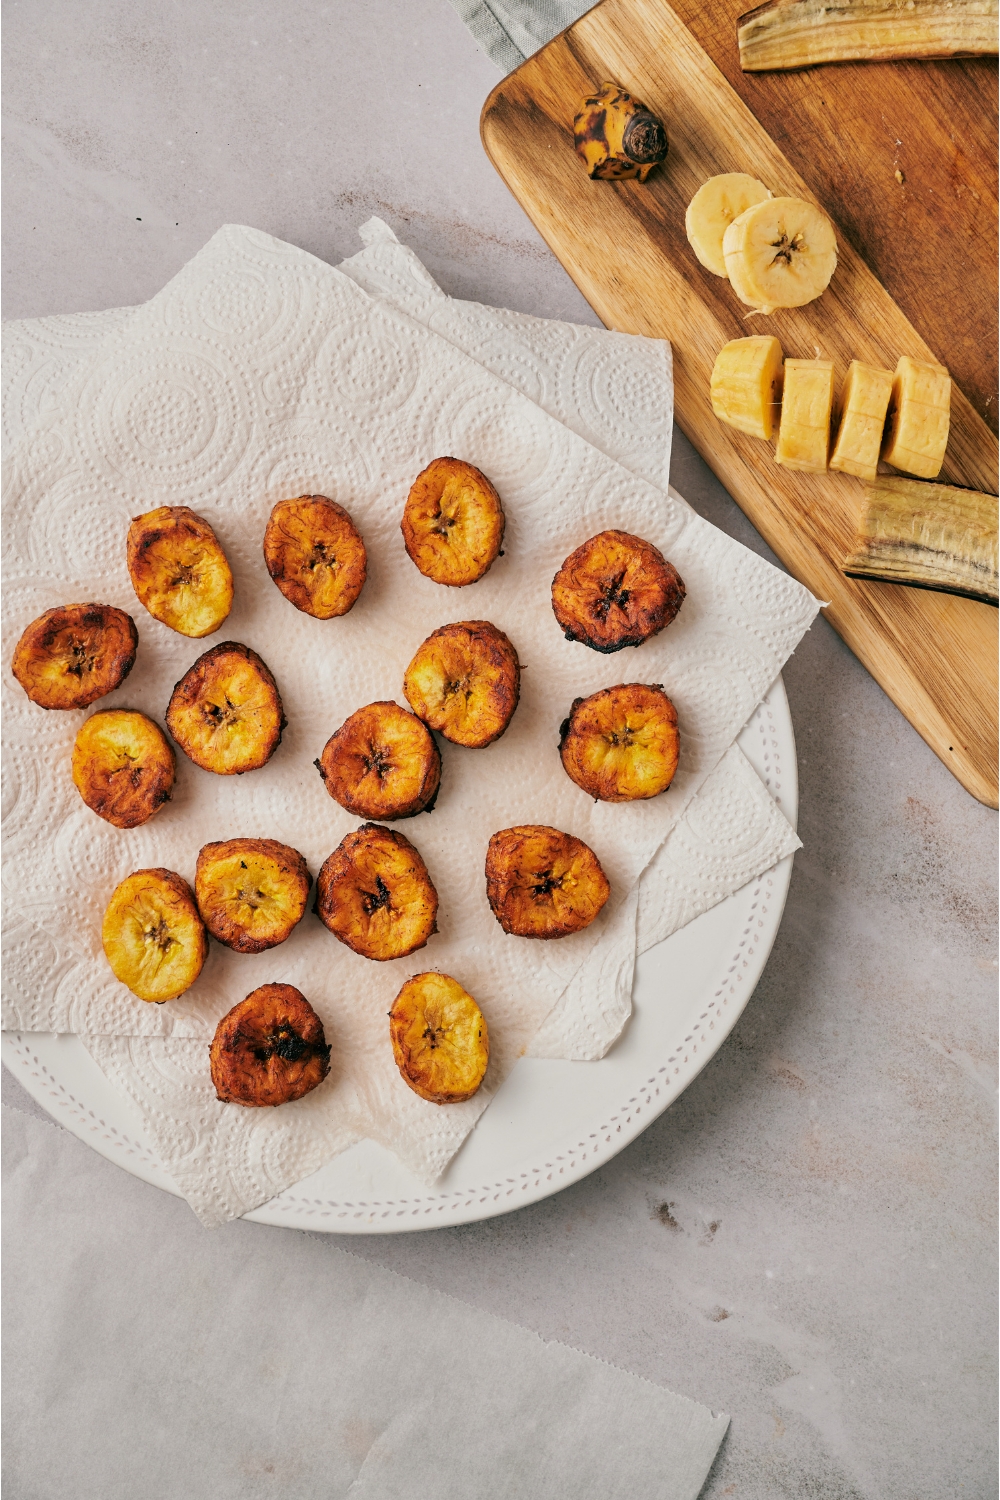 Golden brown plantain slices on a plate lined with three paper towels next to a cutting board with plantain slices and old plantain peels on it.